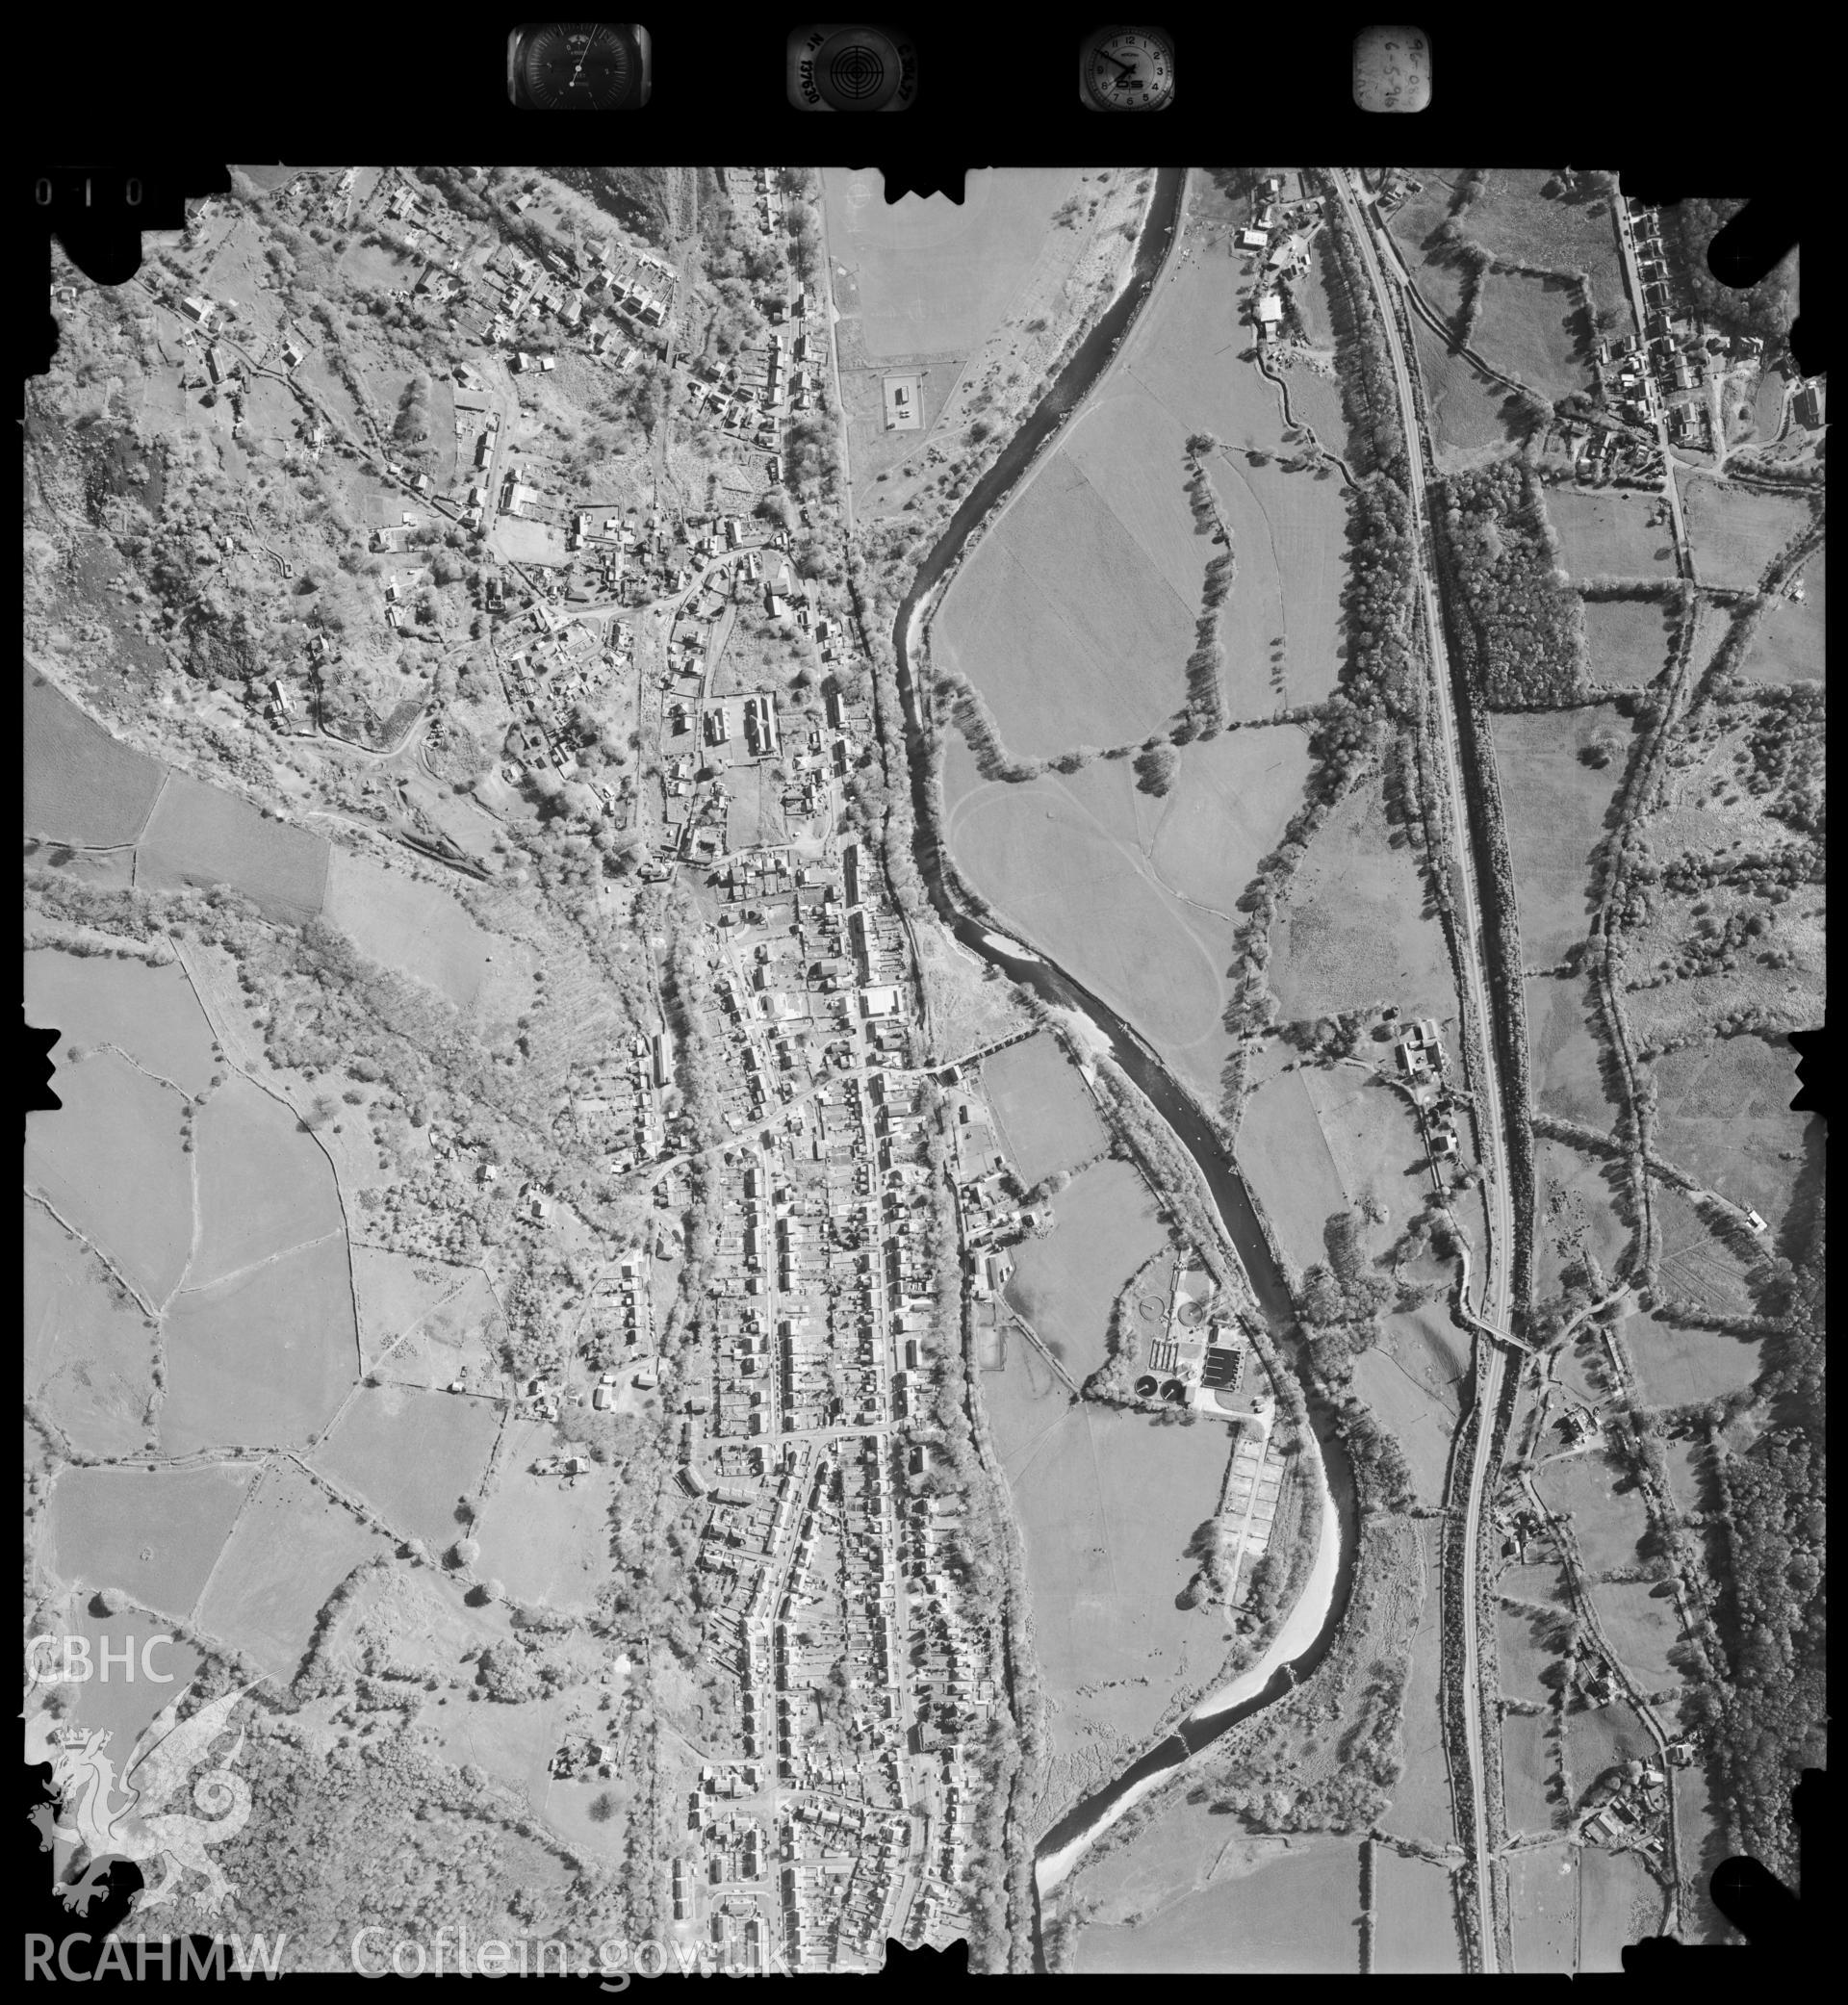 Digitized copy of an aerial photograph showing the Trebanos area, Swansea,  taken by Ordnance Survey, 1996